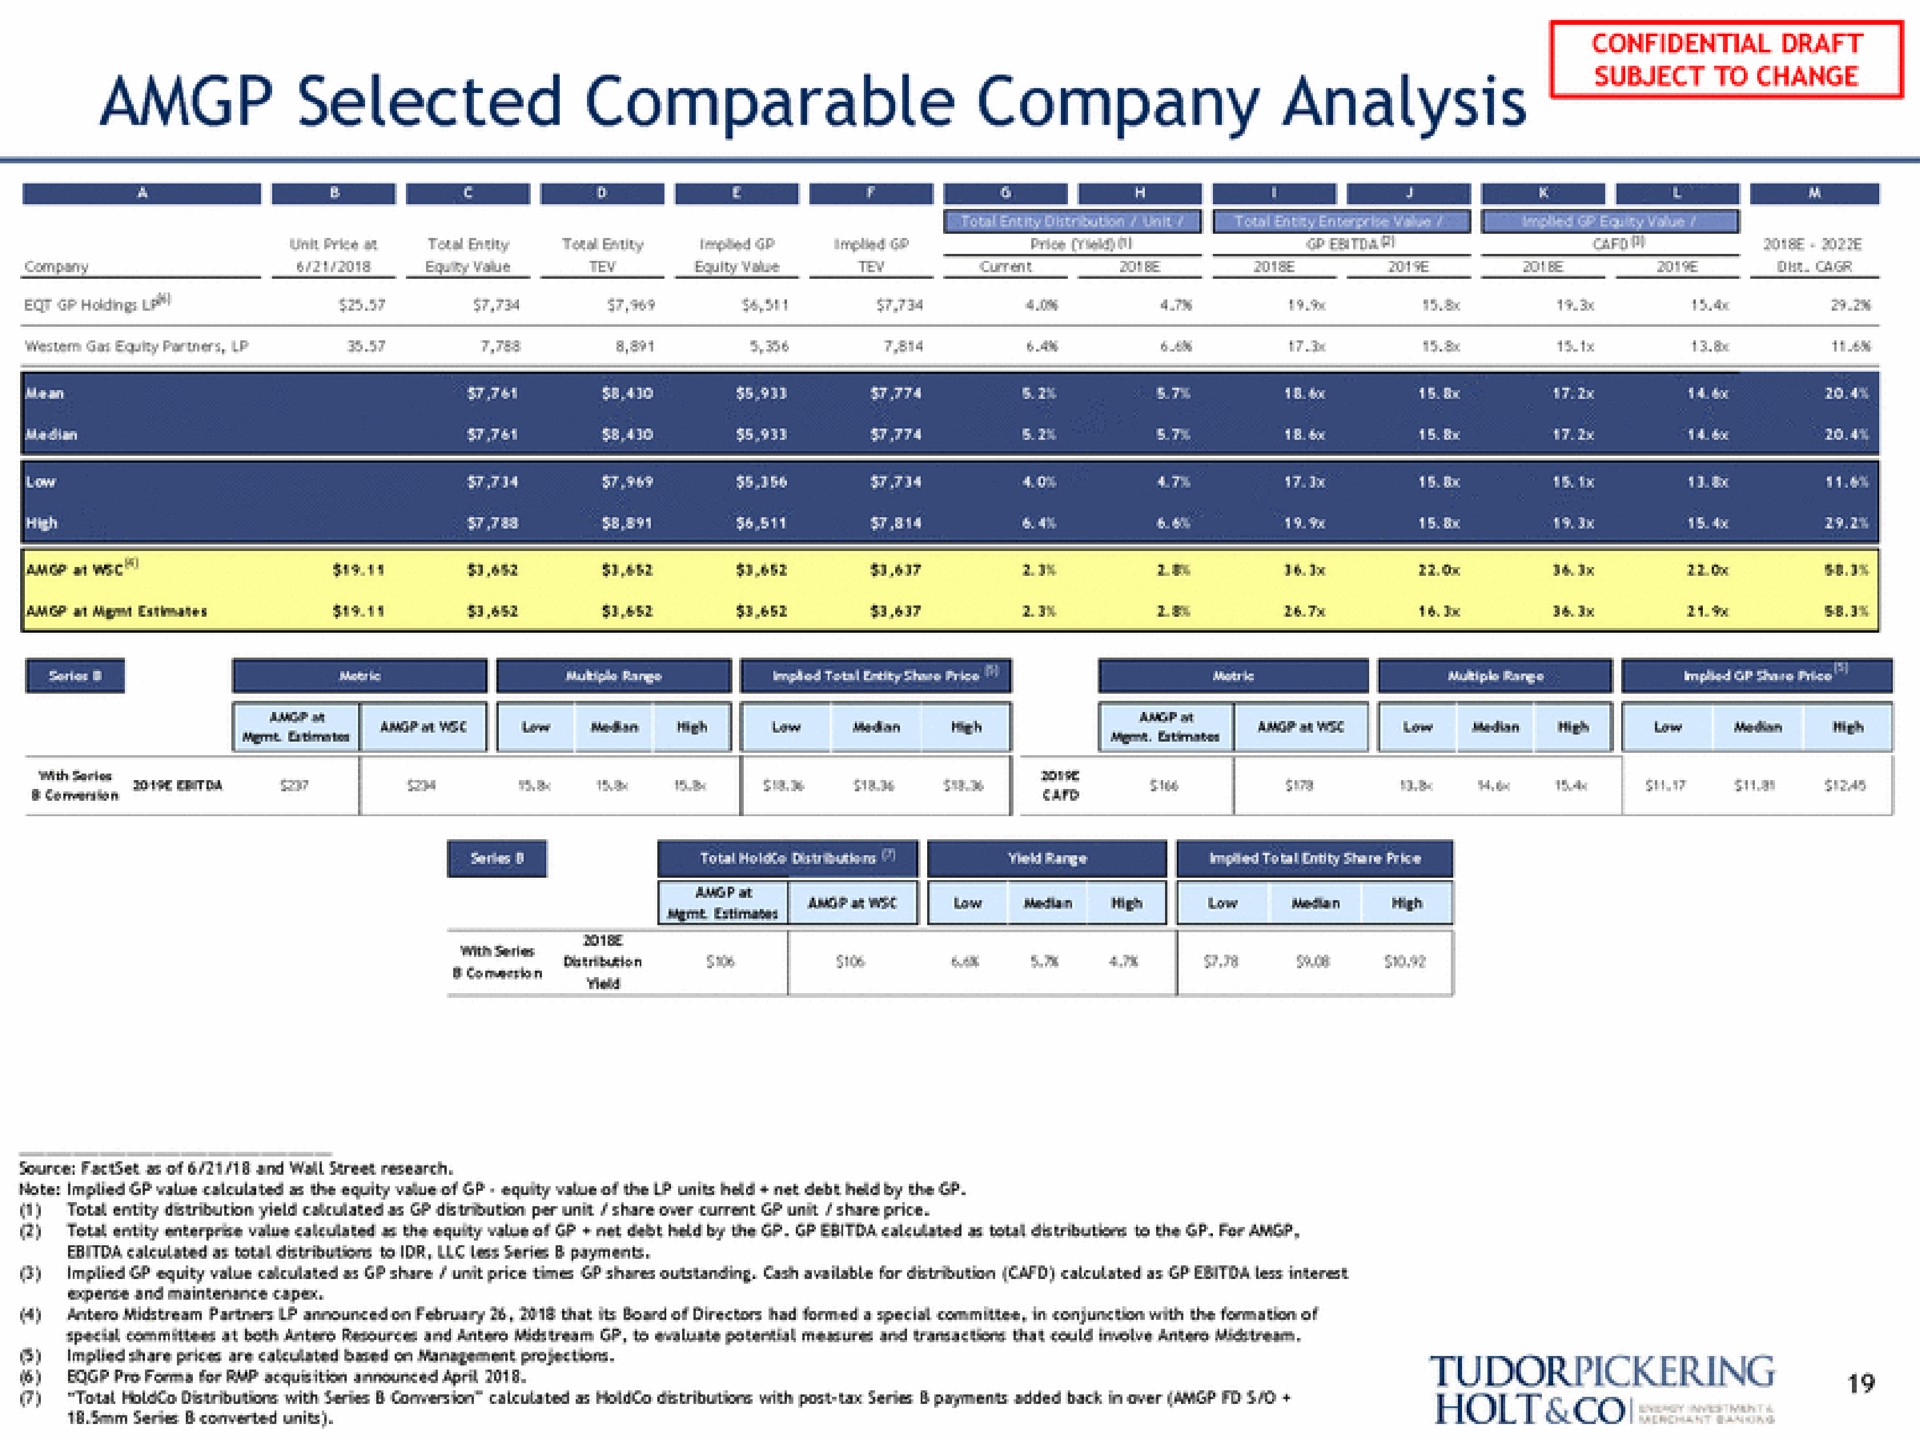 selected comparable company analysis a | Tudor, Pickering, Holt & Co